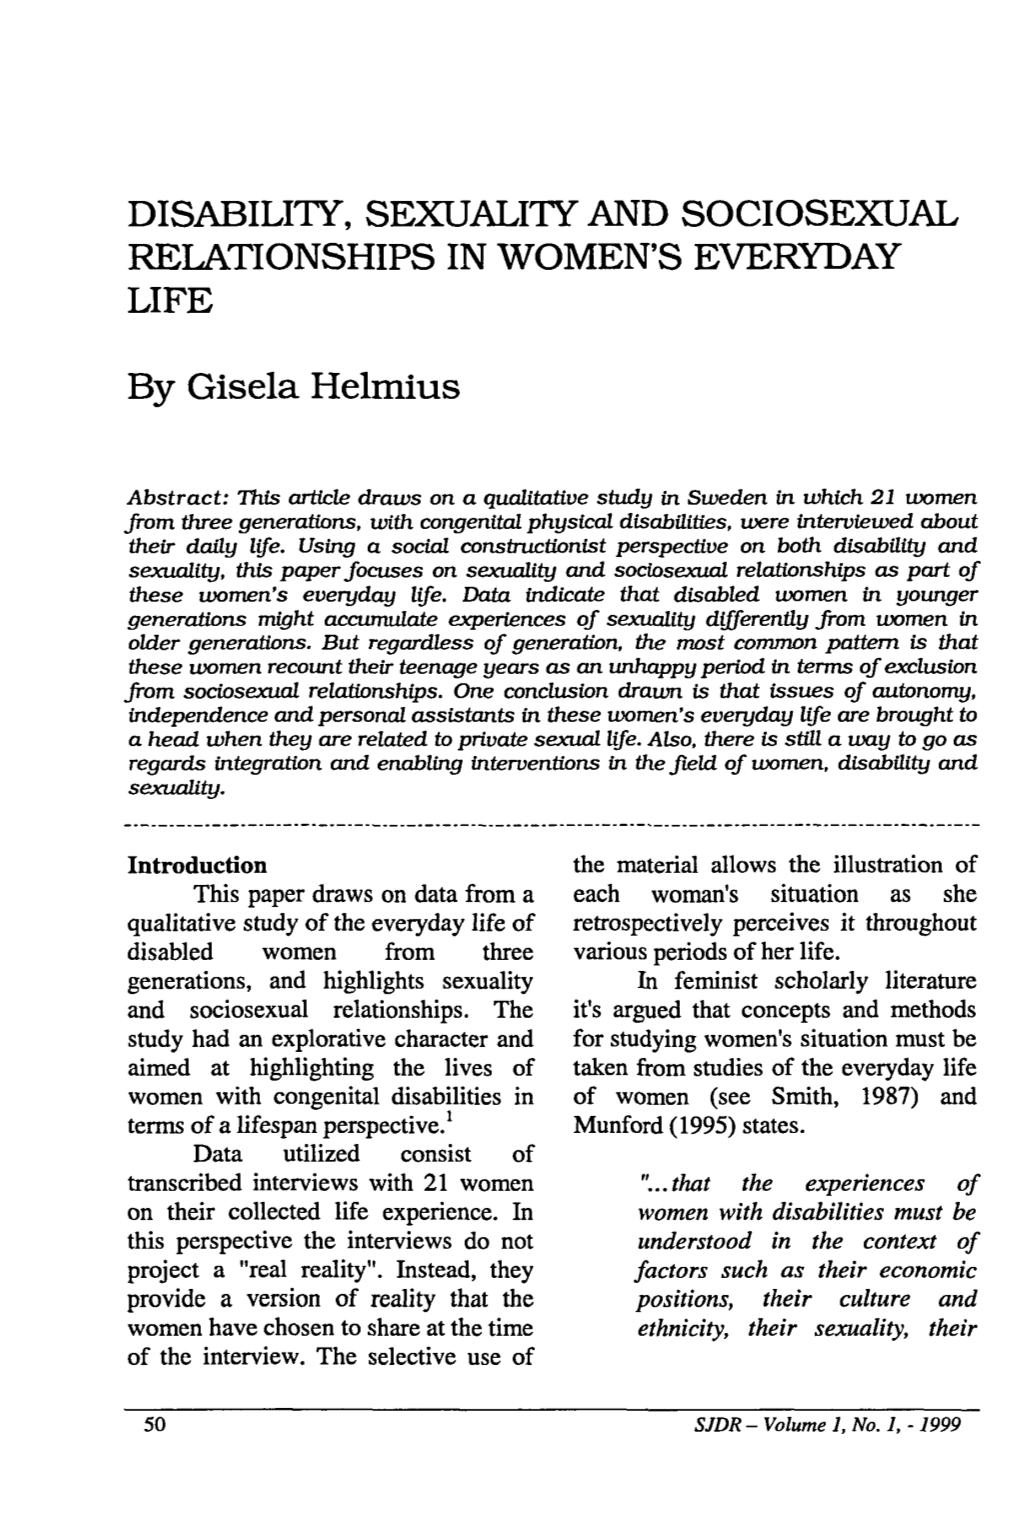 DISABILITY, SEXUALITY and SOCIOSEXUAL RELATIONSHIPS in WOMEN's EVERYDAY LIFE by Gisela Helmius